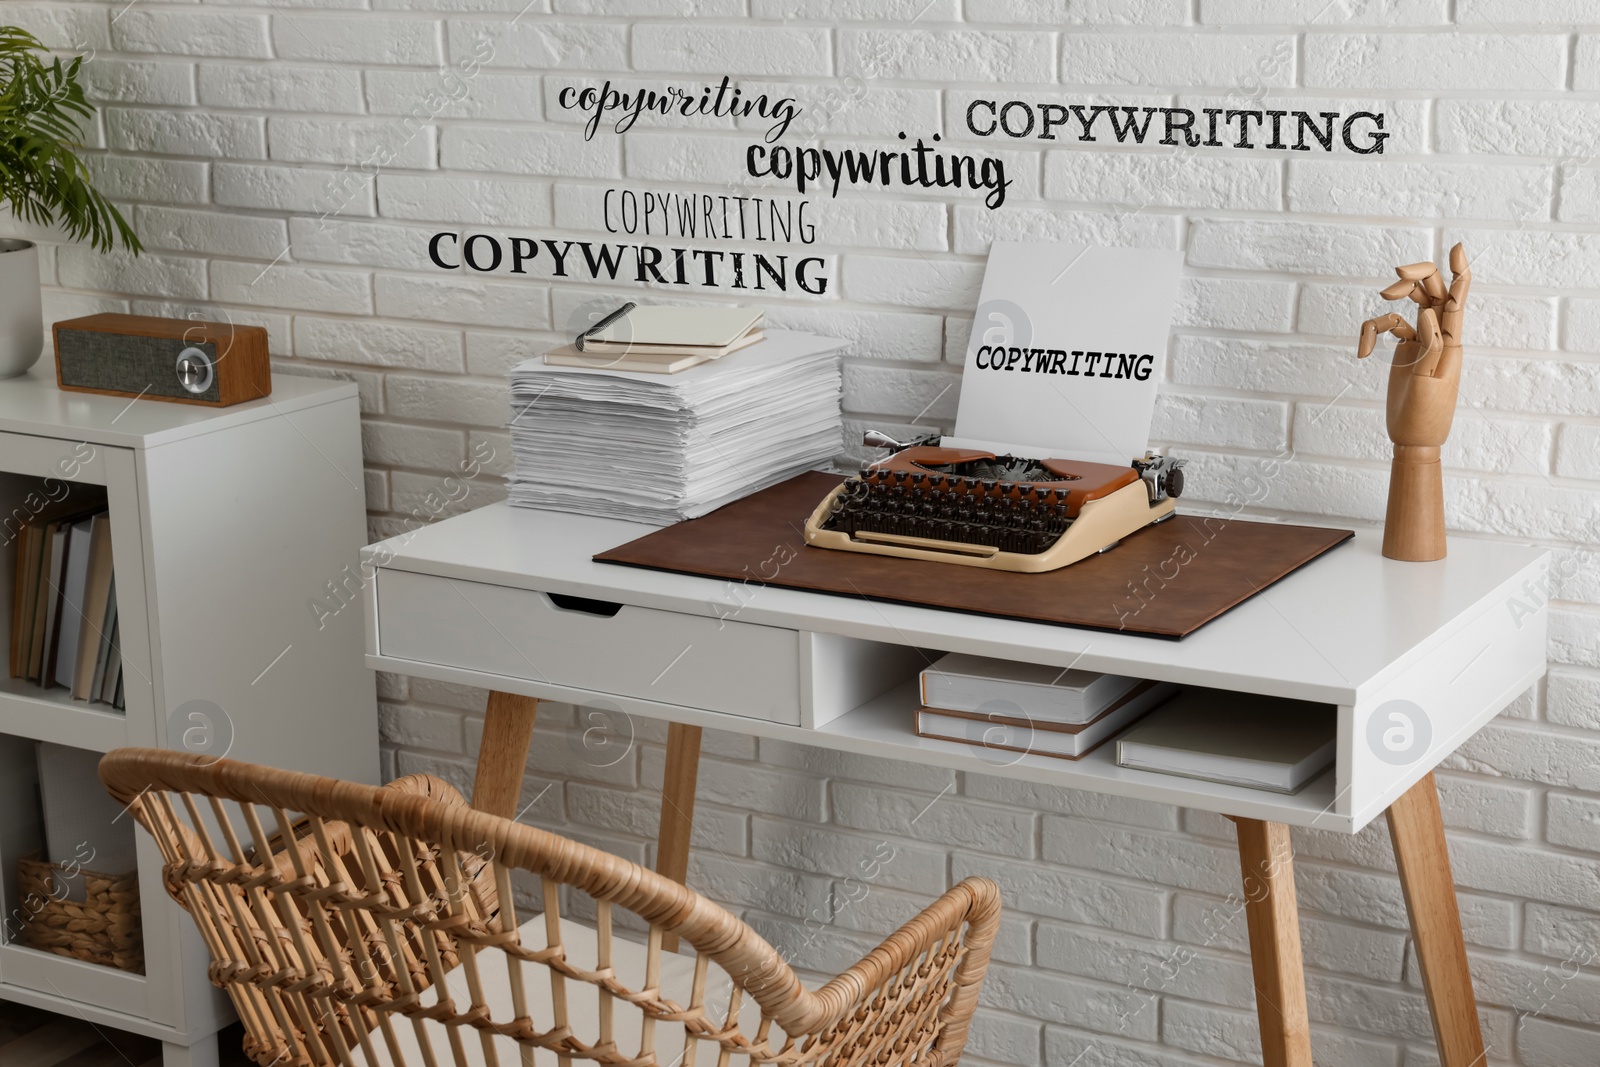 Image of Word Copywriting in different fonts on paper and wall. Workplace with typewriter